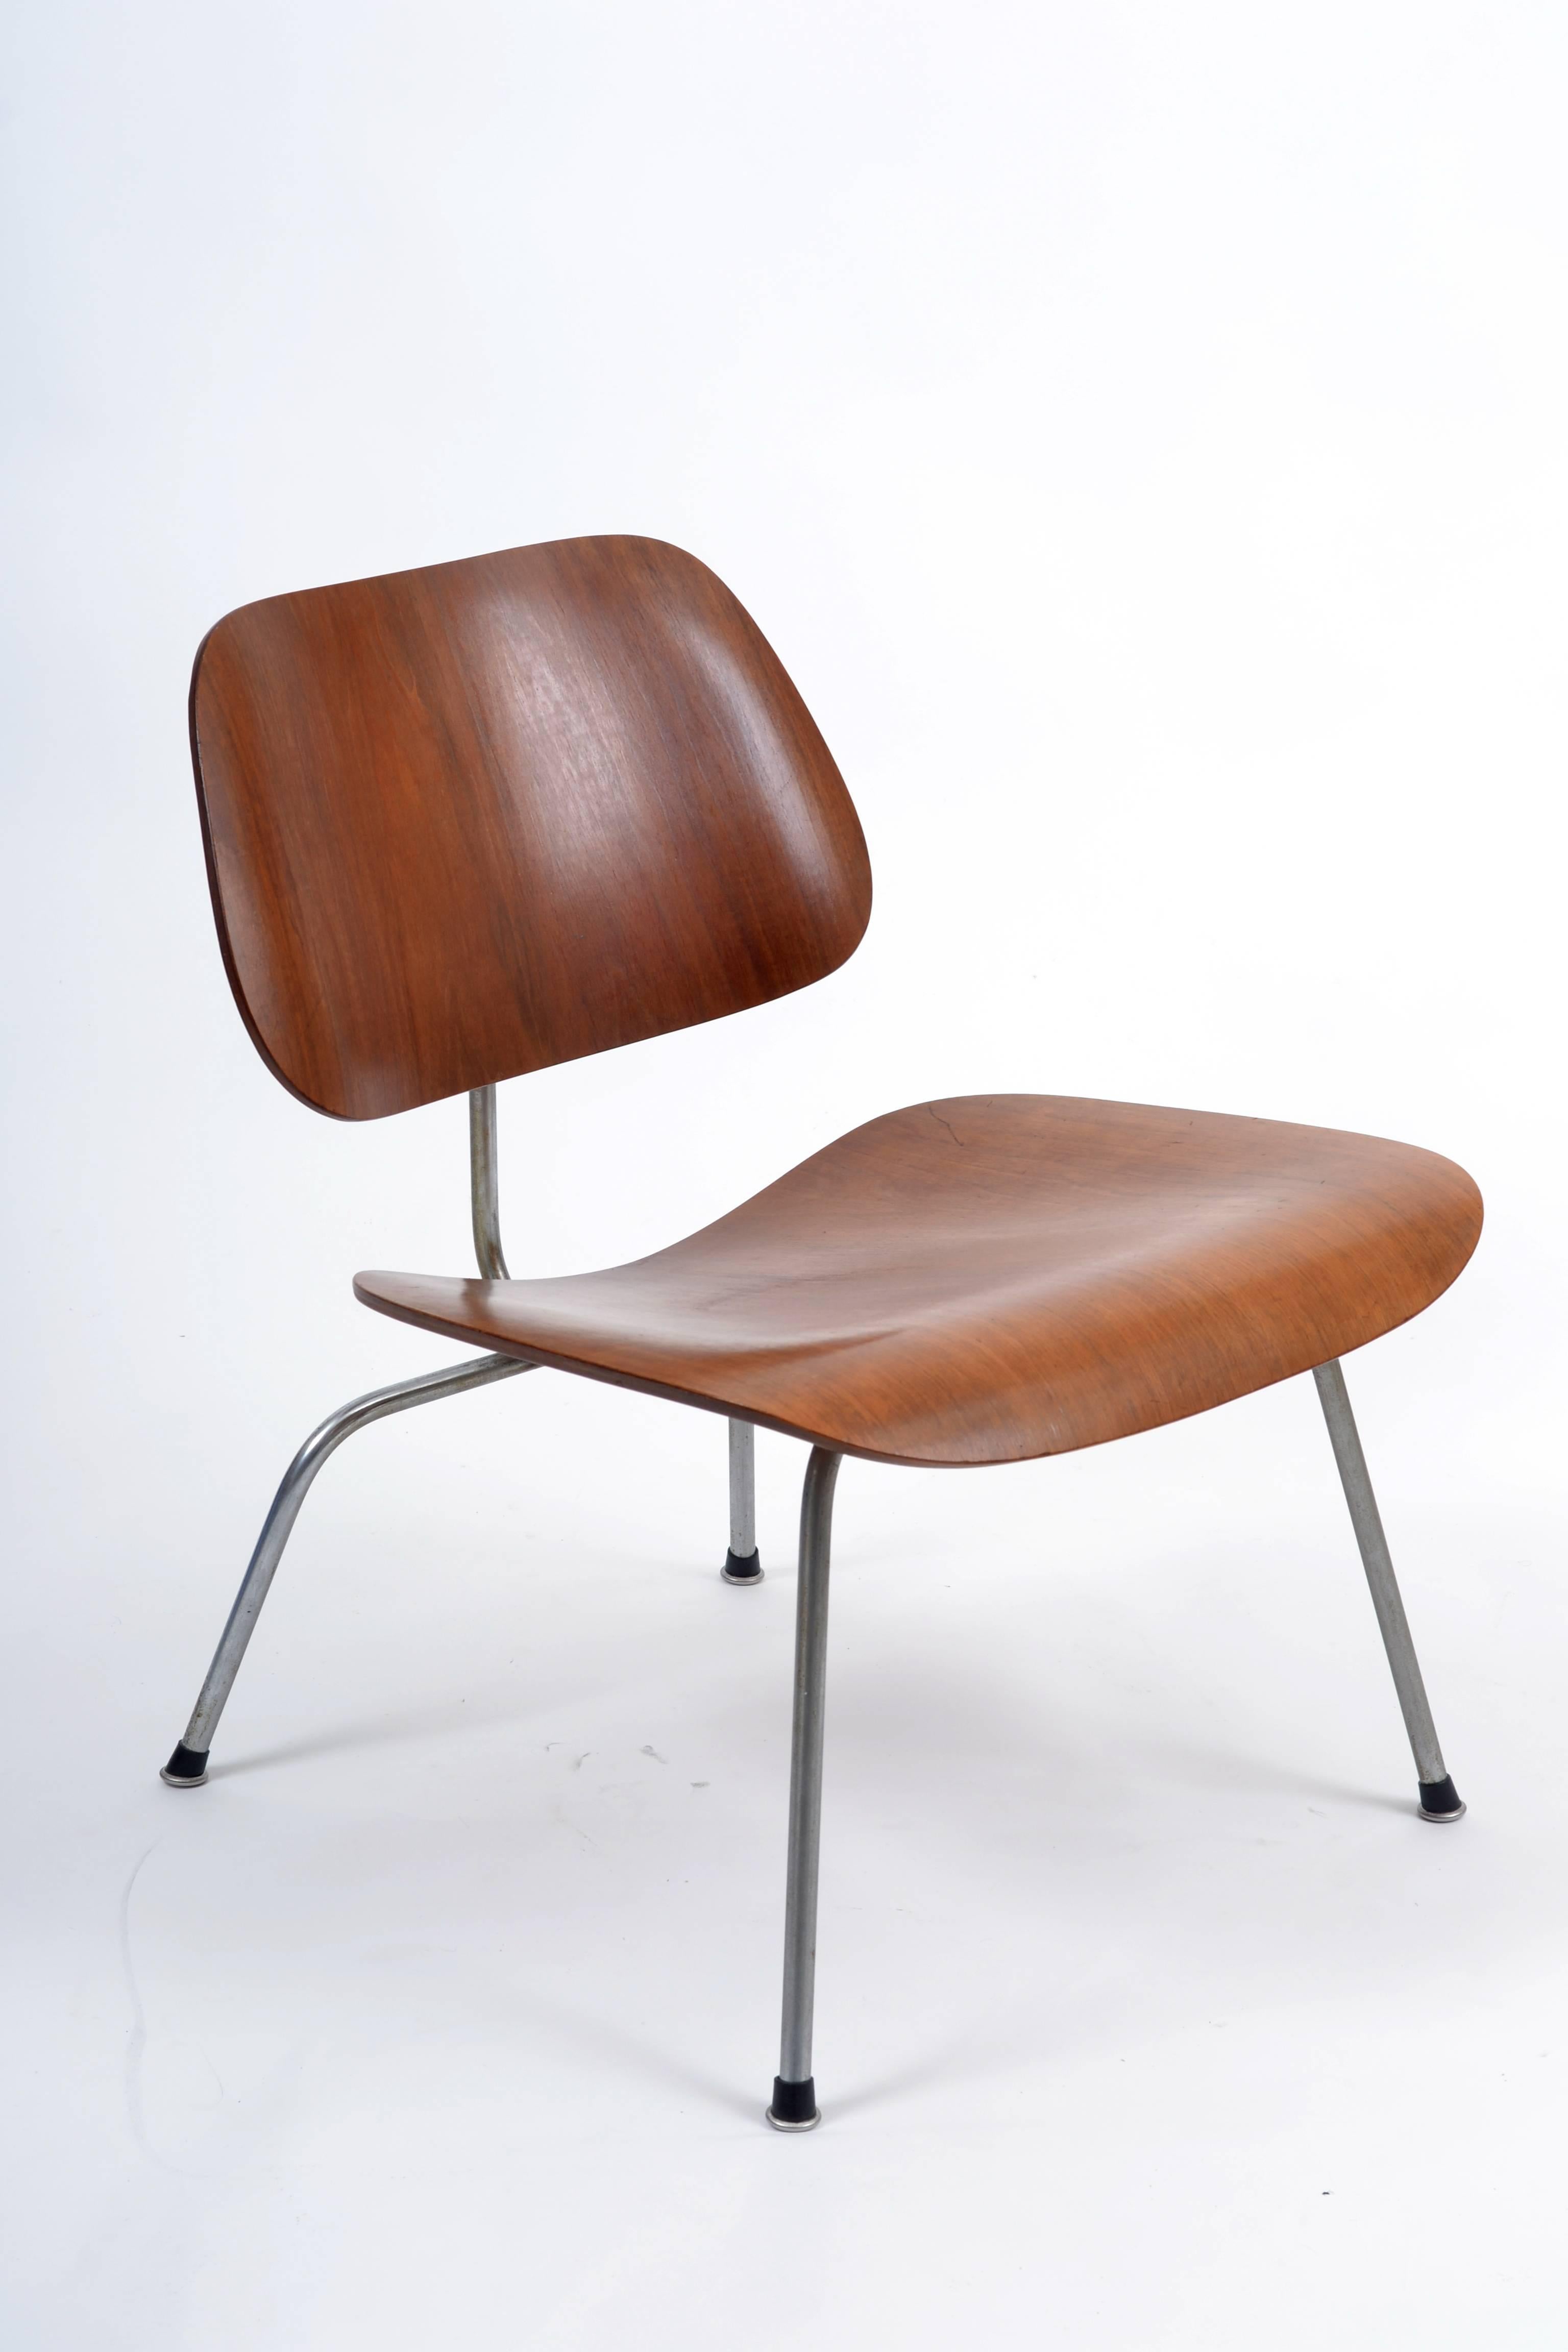 All original, beautiful Herman Miller LCM designed by Charles Eames. A wonderful, well maintained example in rare Teak veneer.